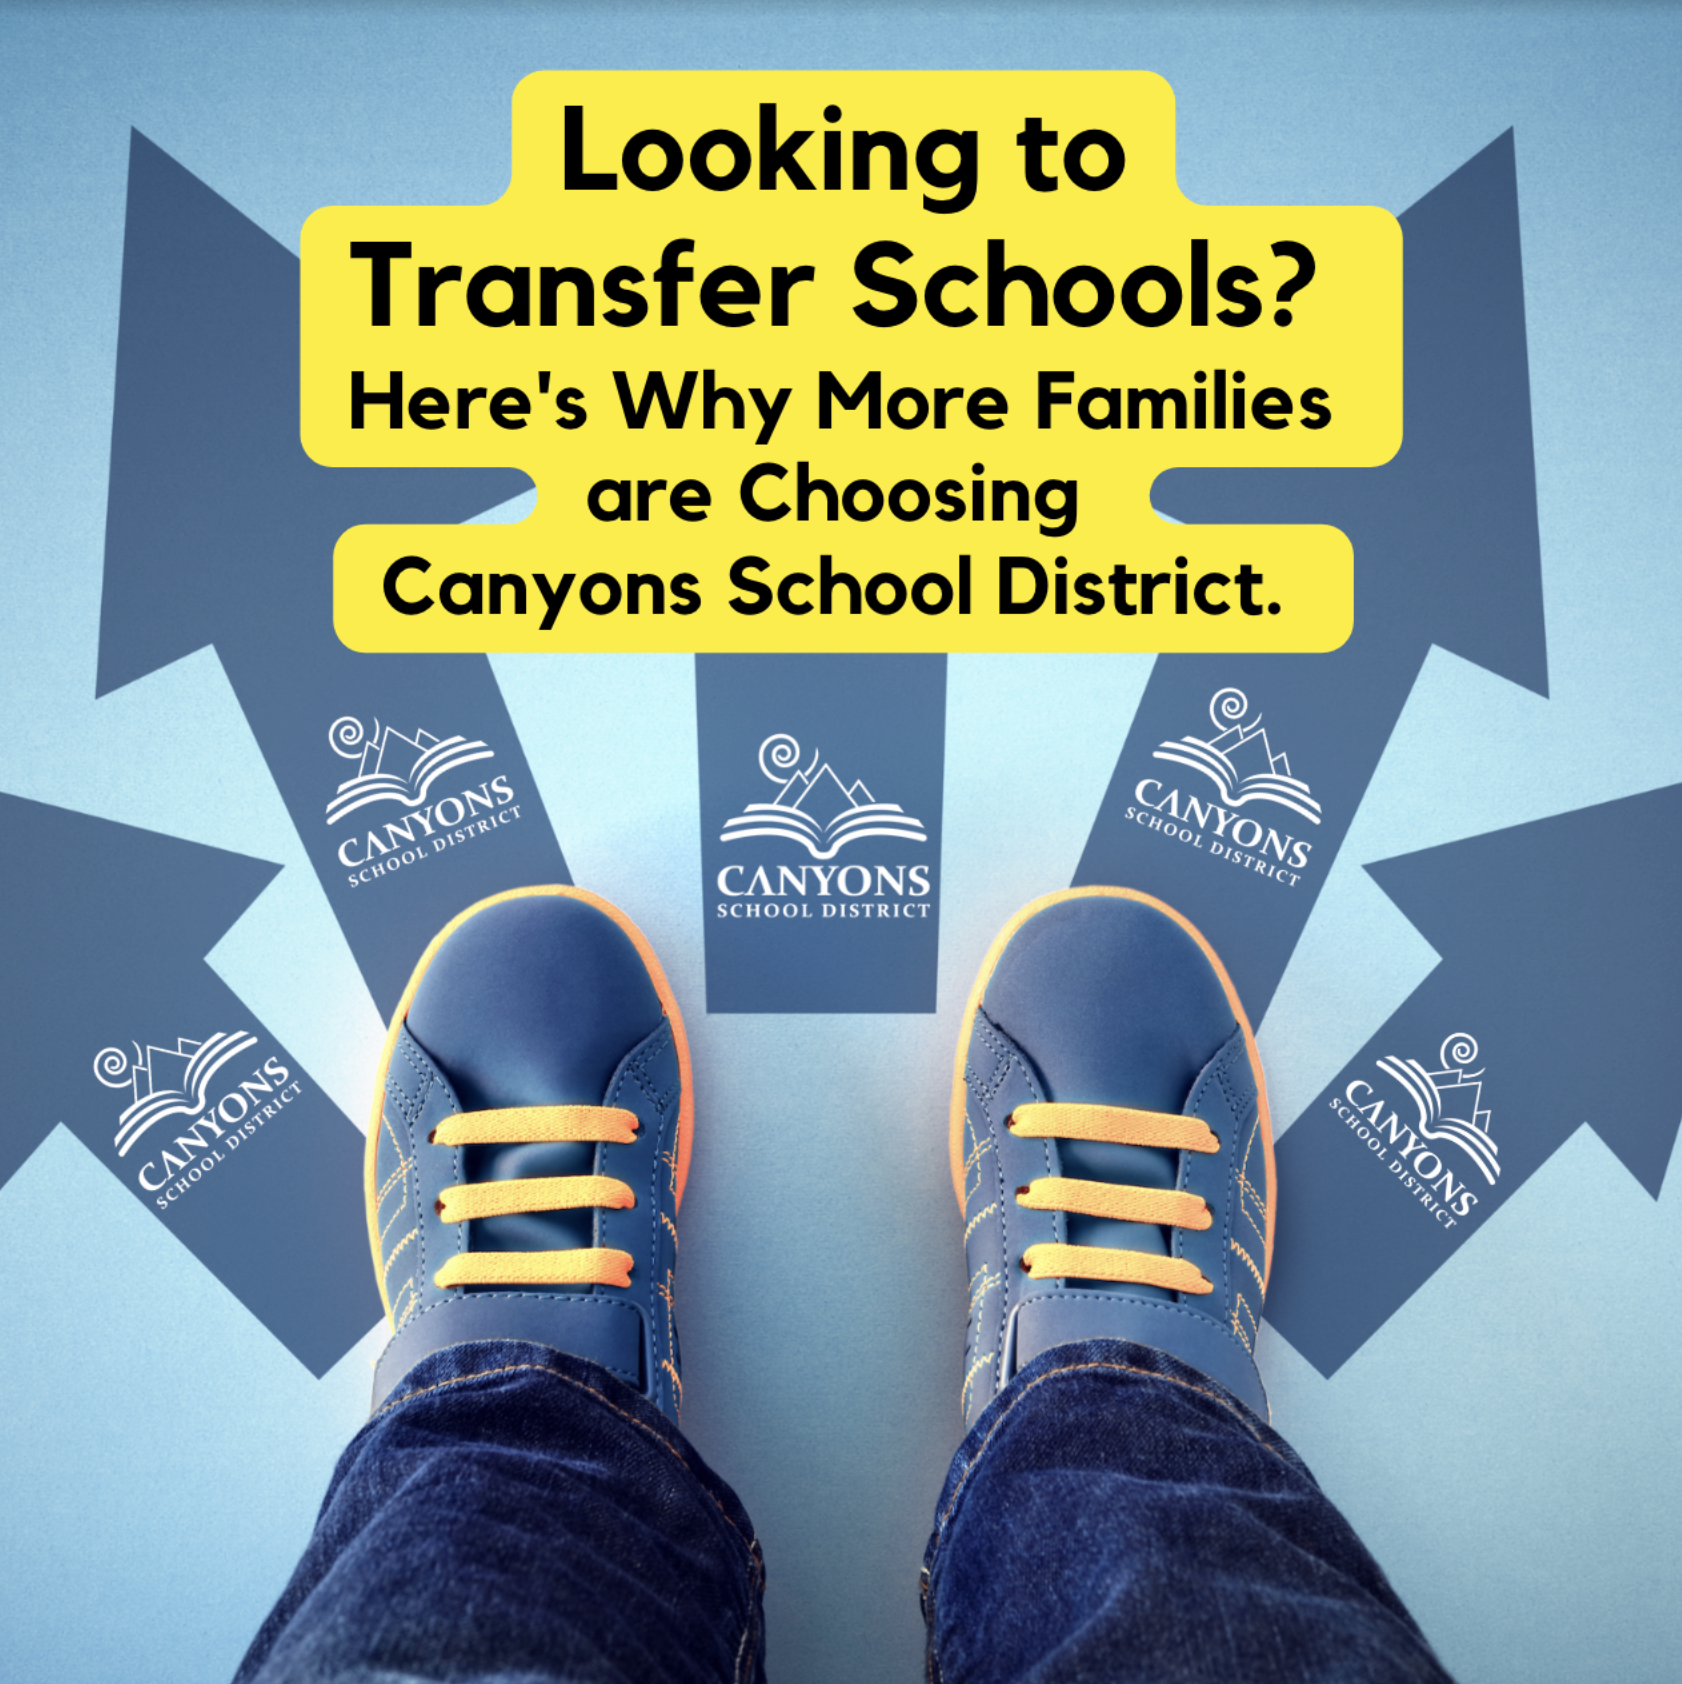 Looking to transfer schools? Here is why more families are choosing Canyons School District